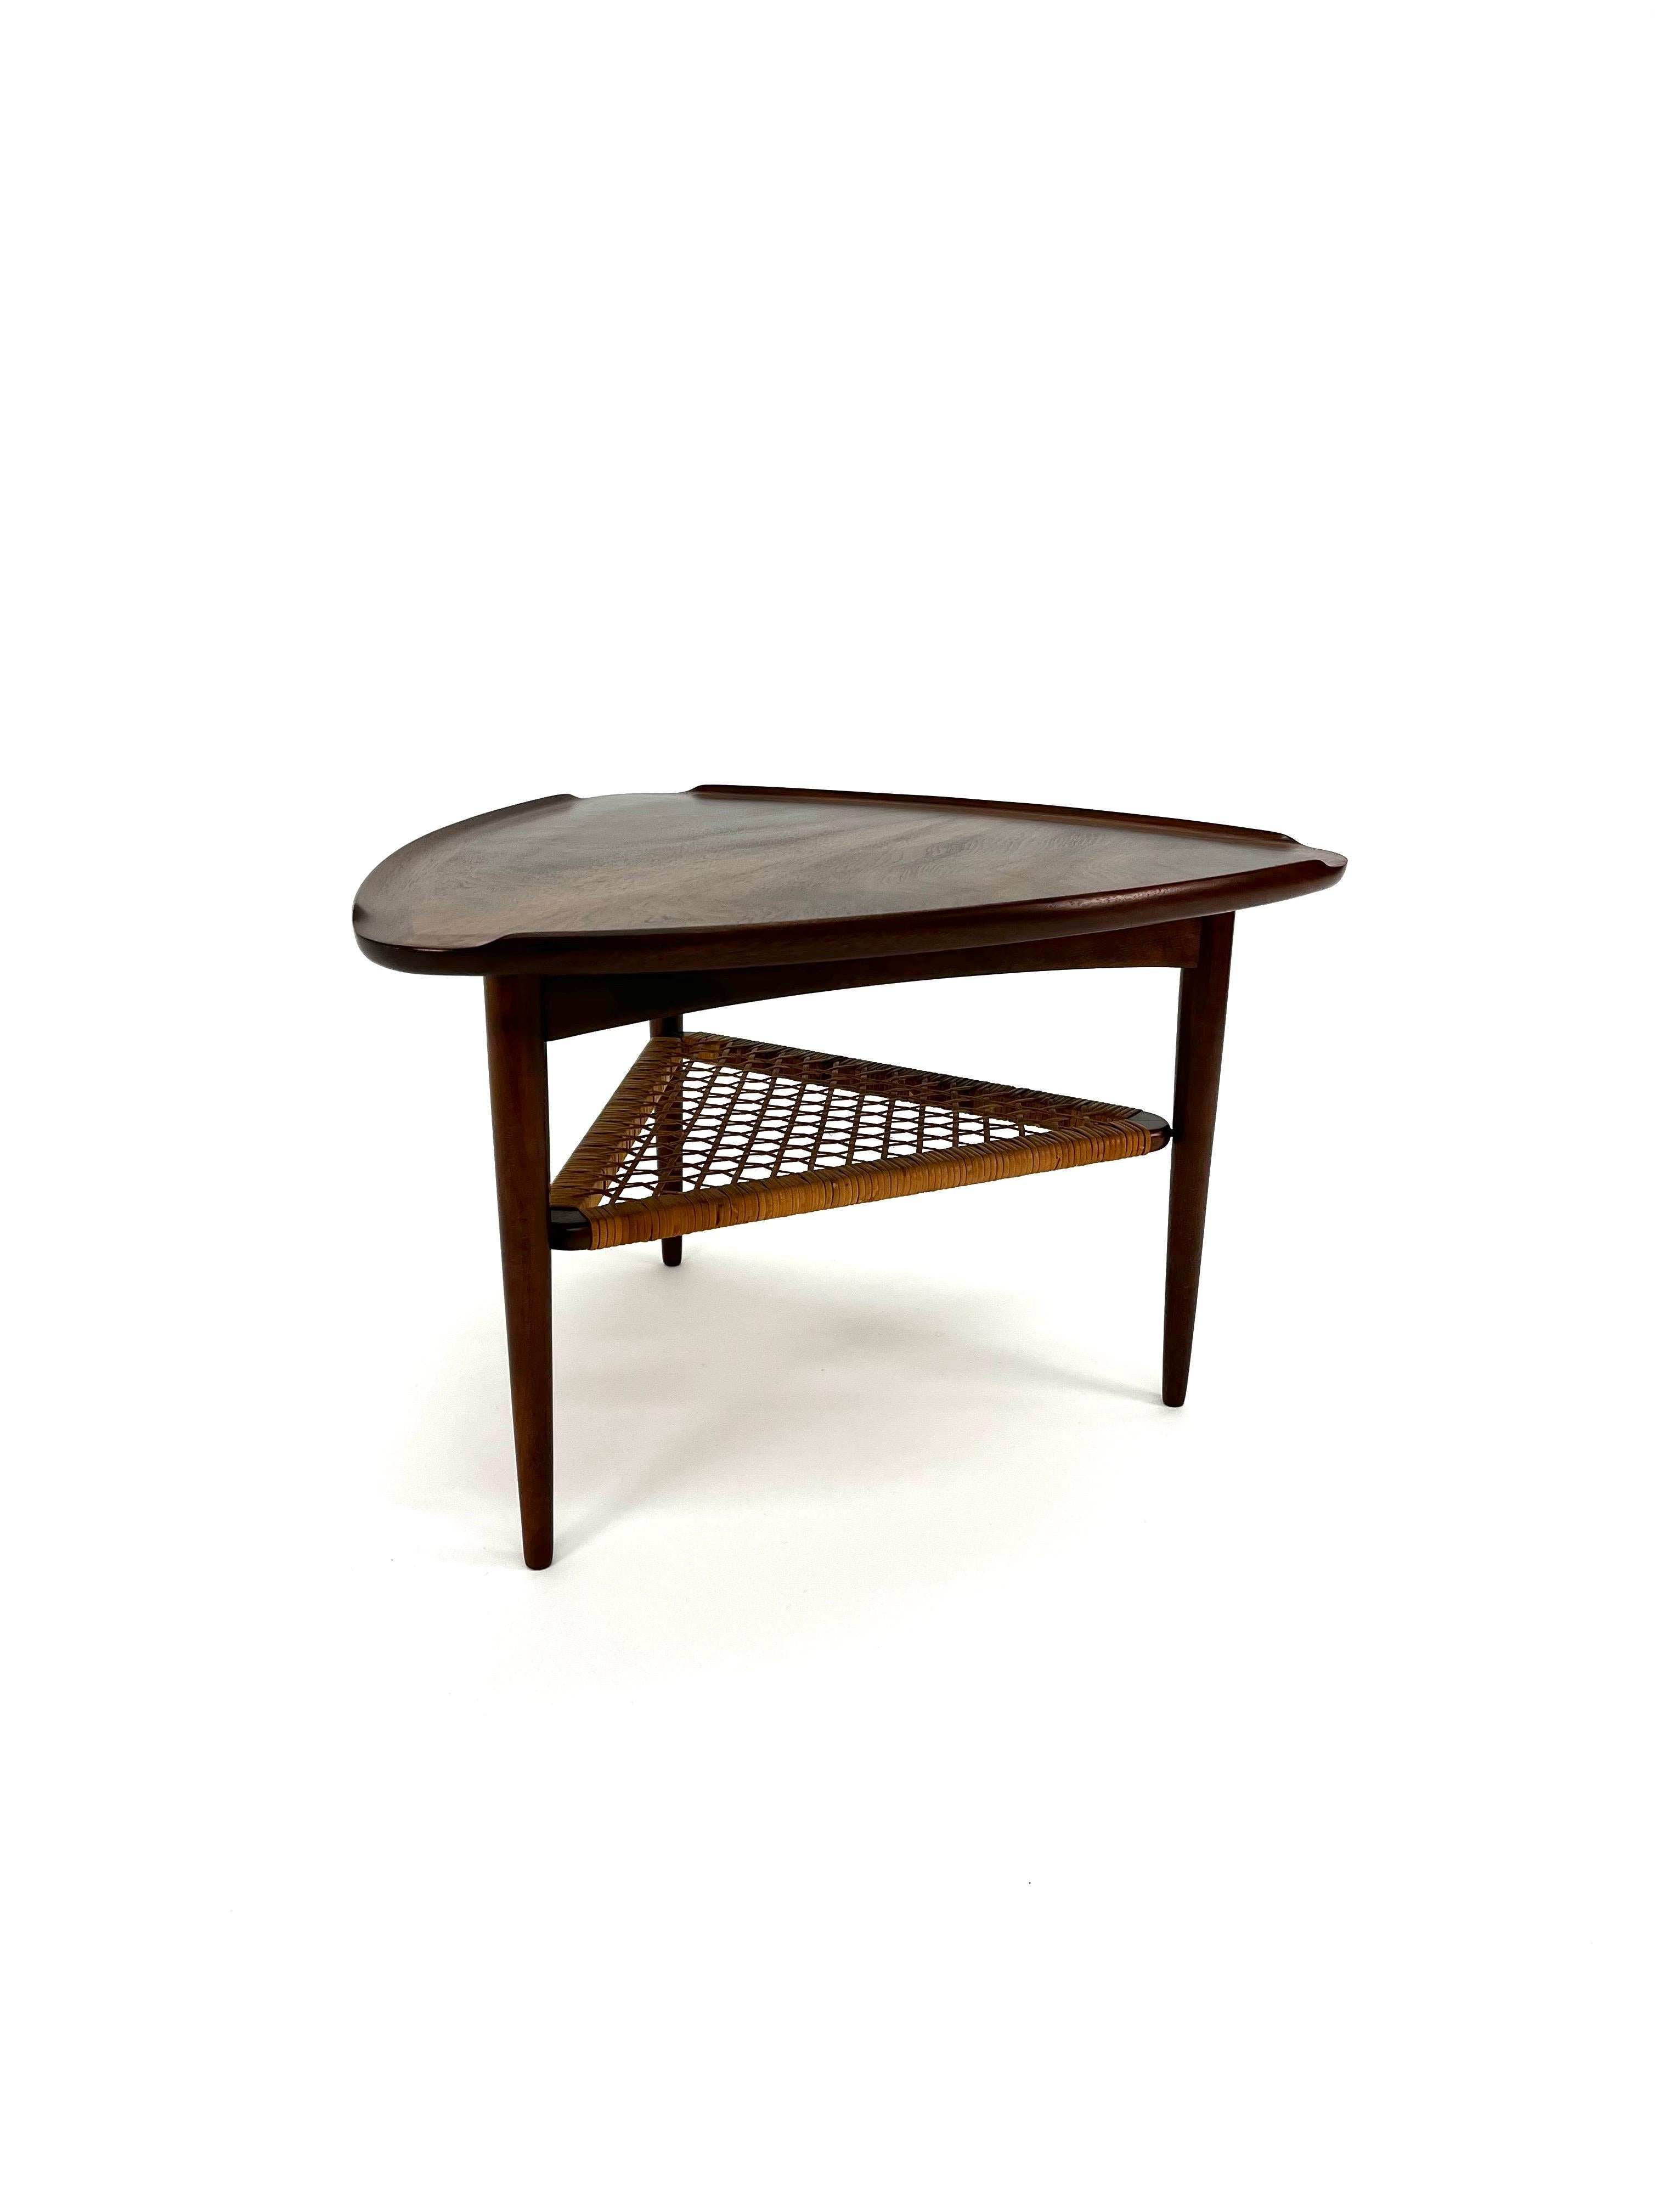 Danish Mid-Century Modern Poul Jensen for Selig Guitar Pick side table in teak woven cane. Featuring a unique raised edge top triangular surface and lower tier magazine shelf made of woven cane. Original stamp 